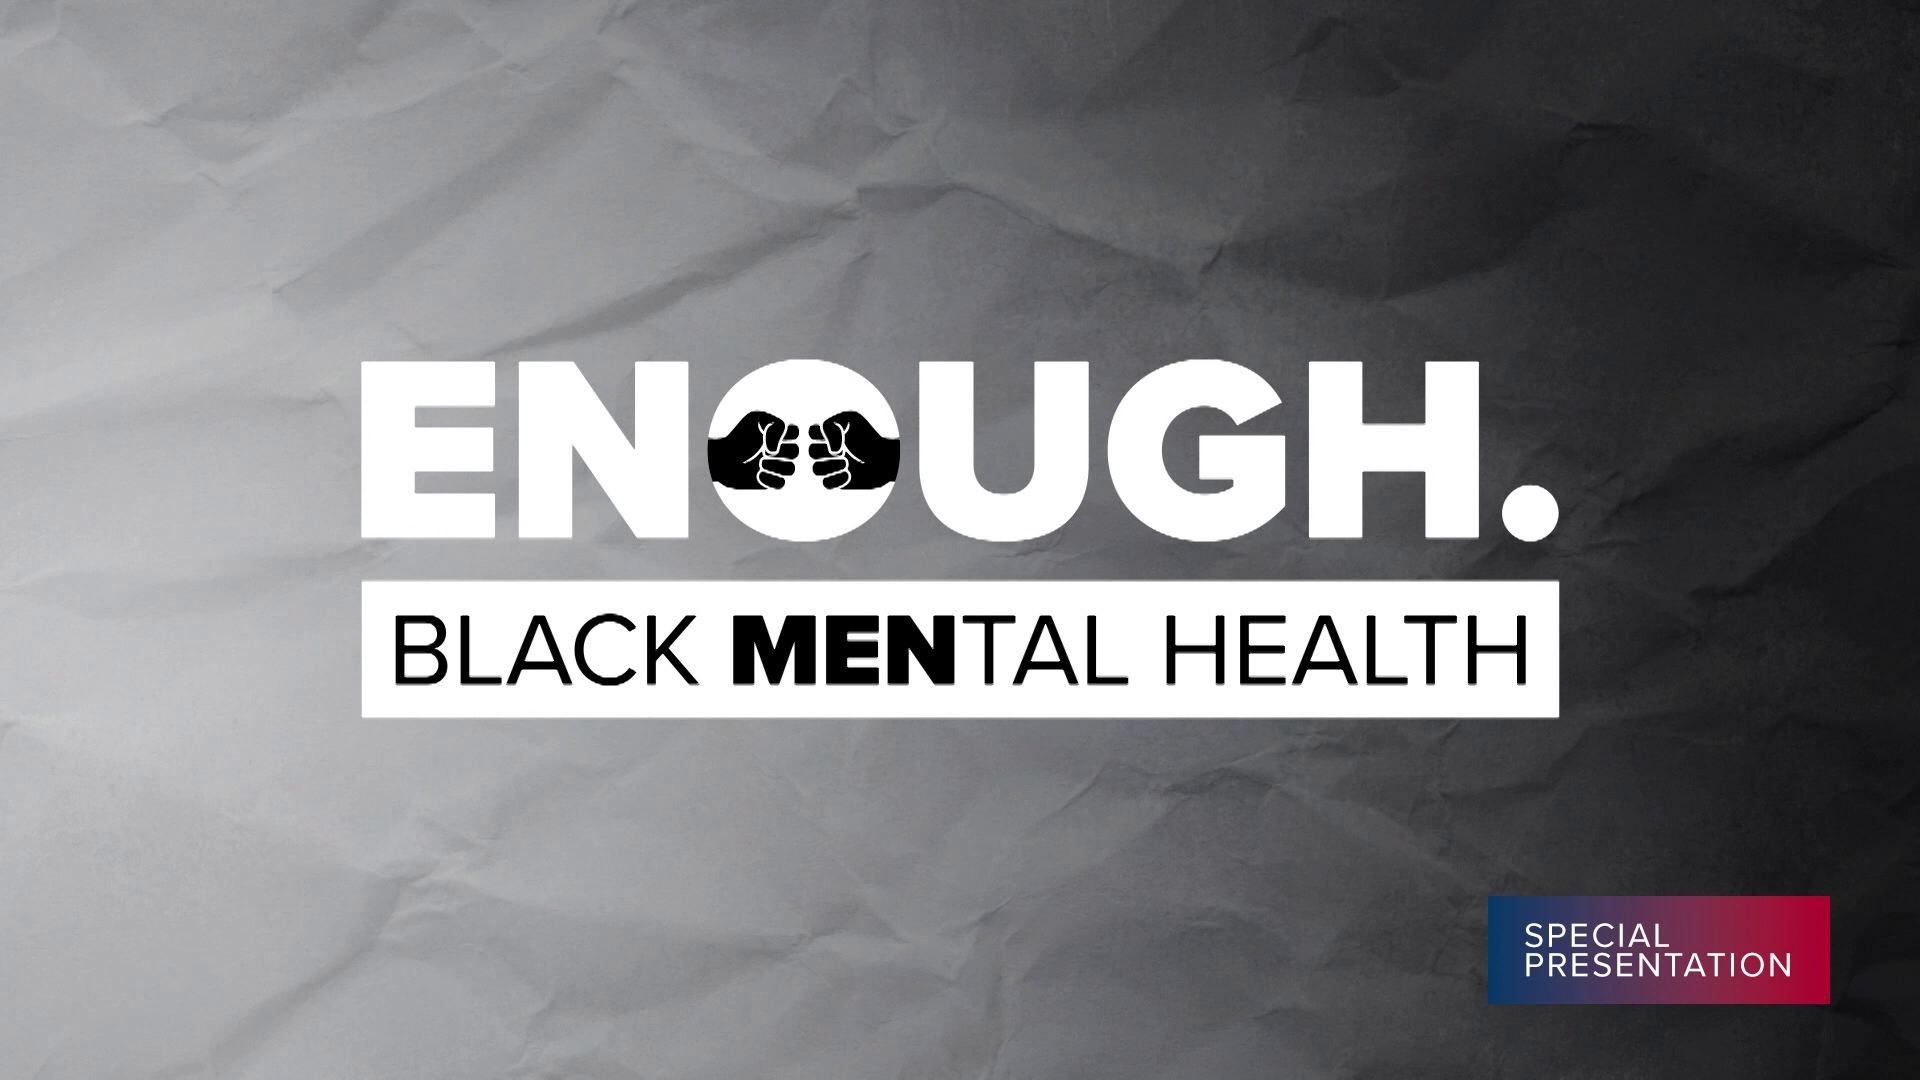 From the role of church to the idea of masculinity, many topics play a role in mental health, especially among a group often left out of the conversation: Black men.